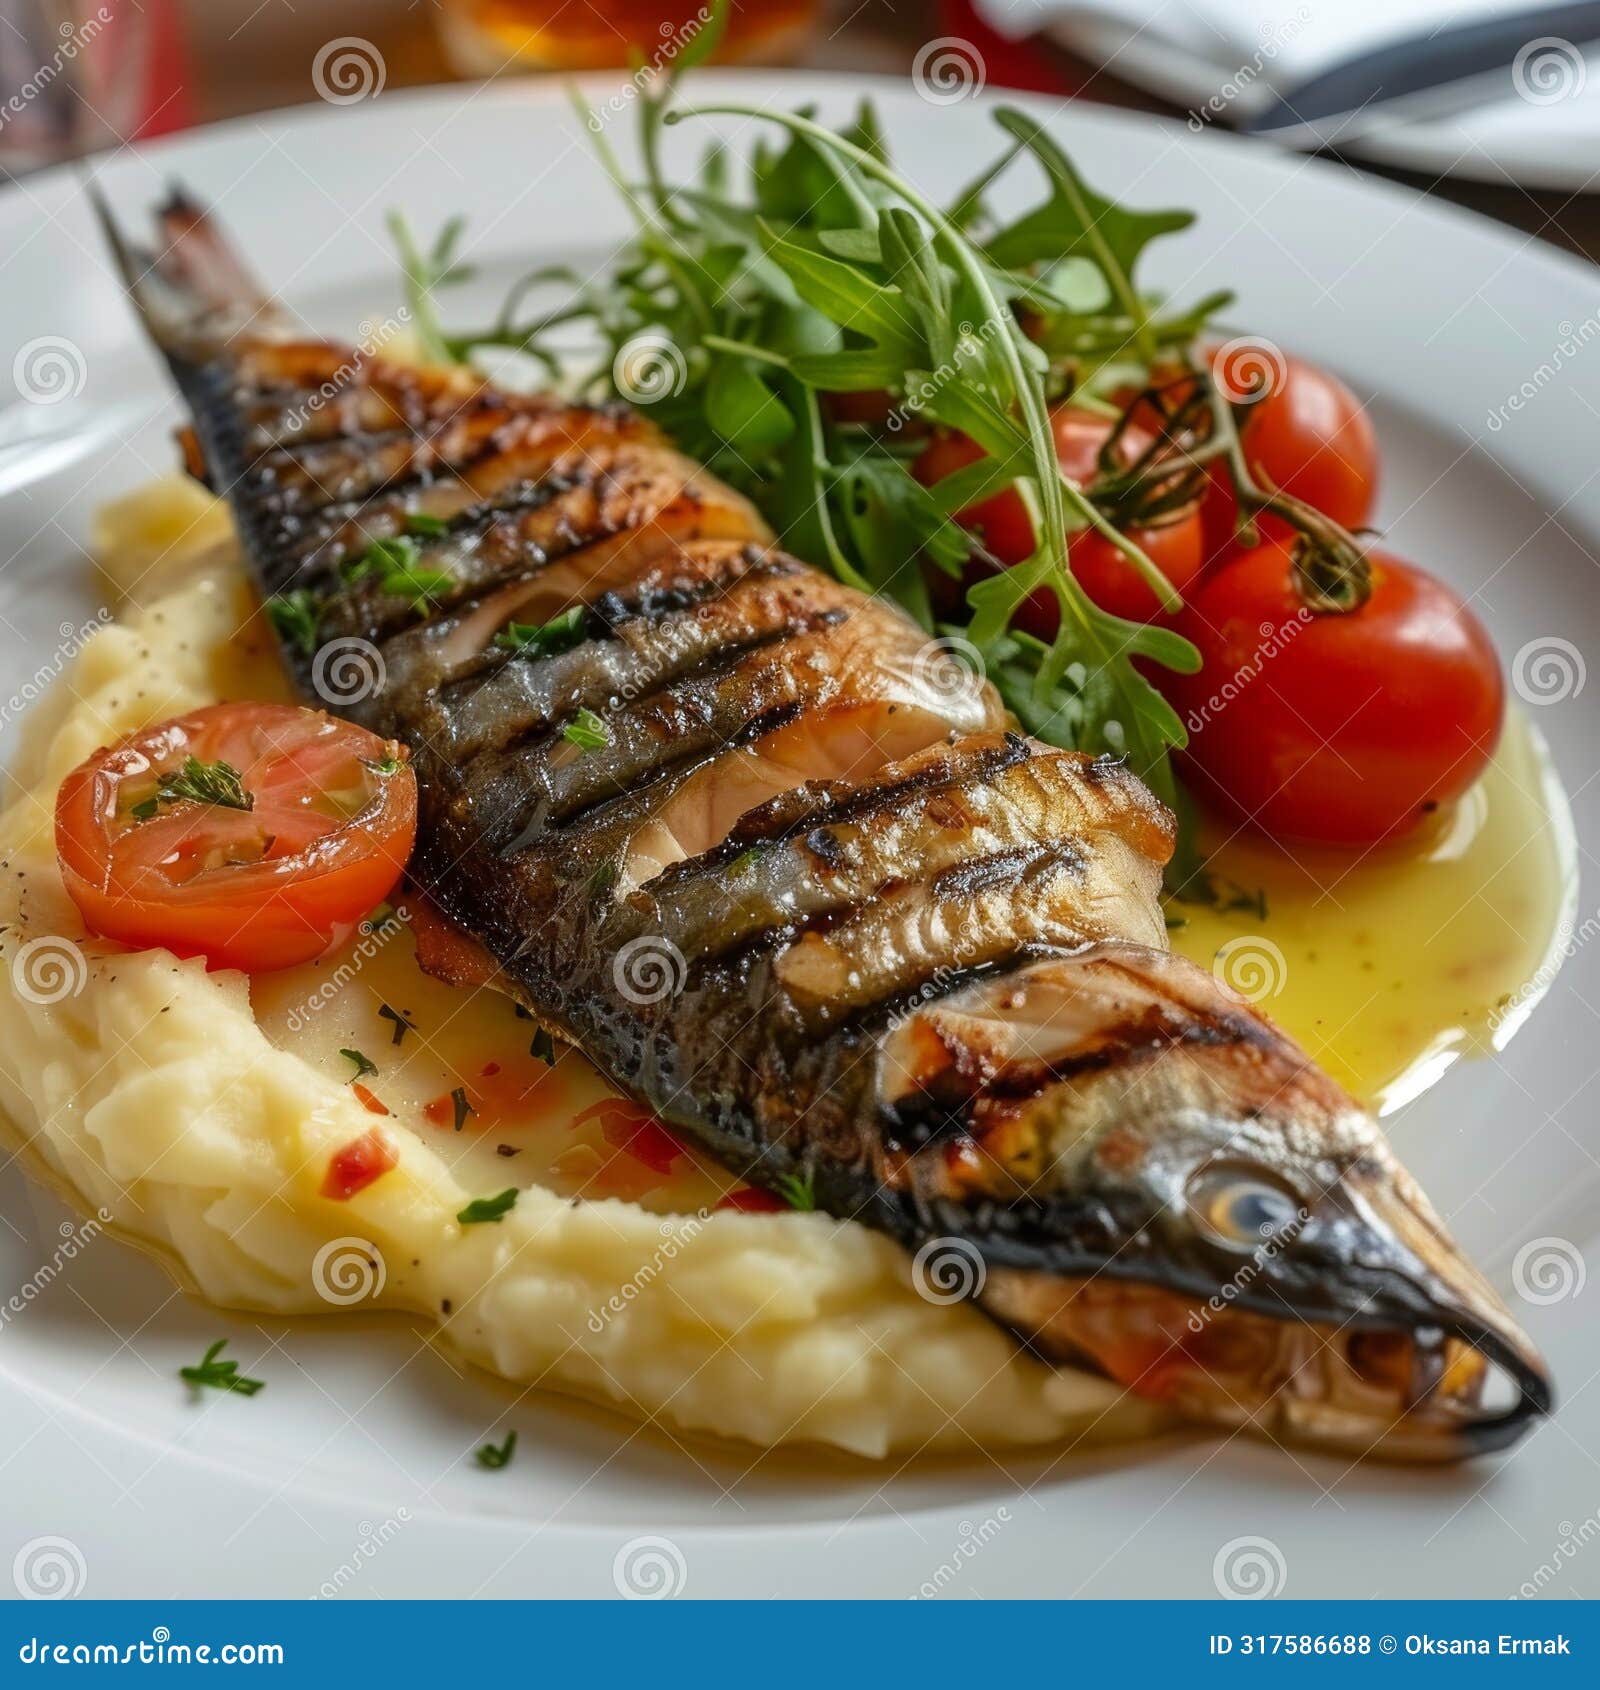 grilled mackerel with mashed potatoes and tomatoes, fried scomber fillet